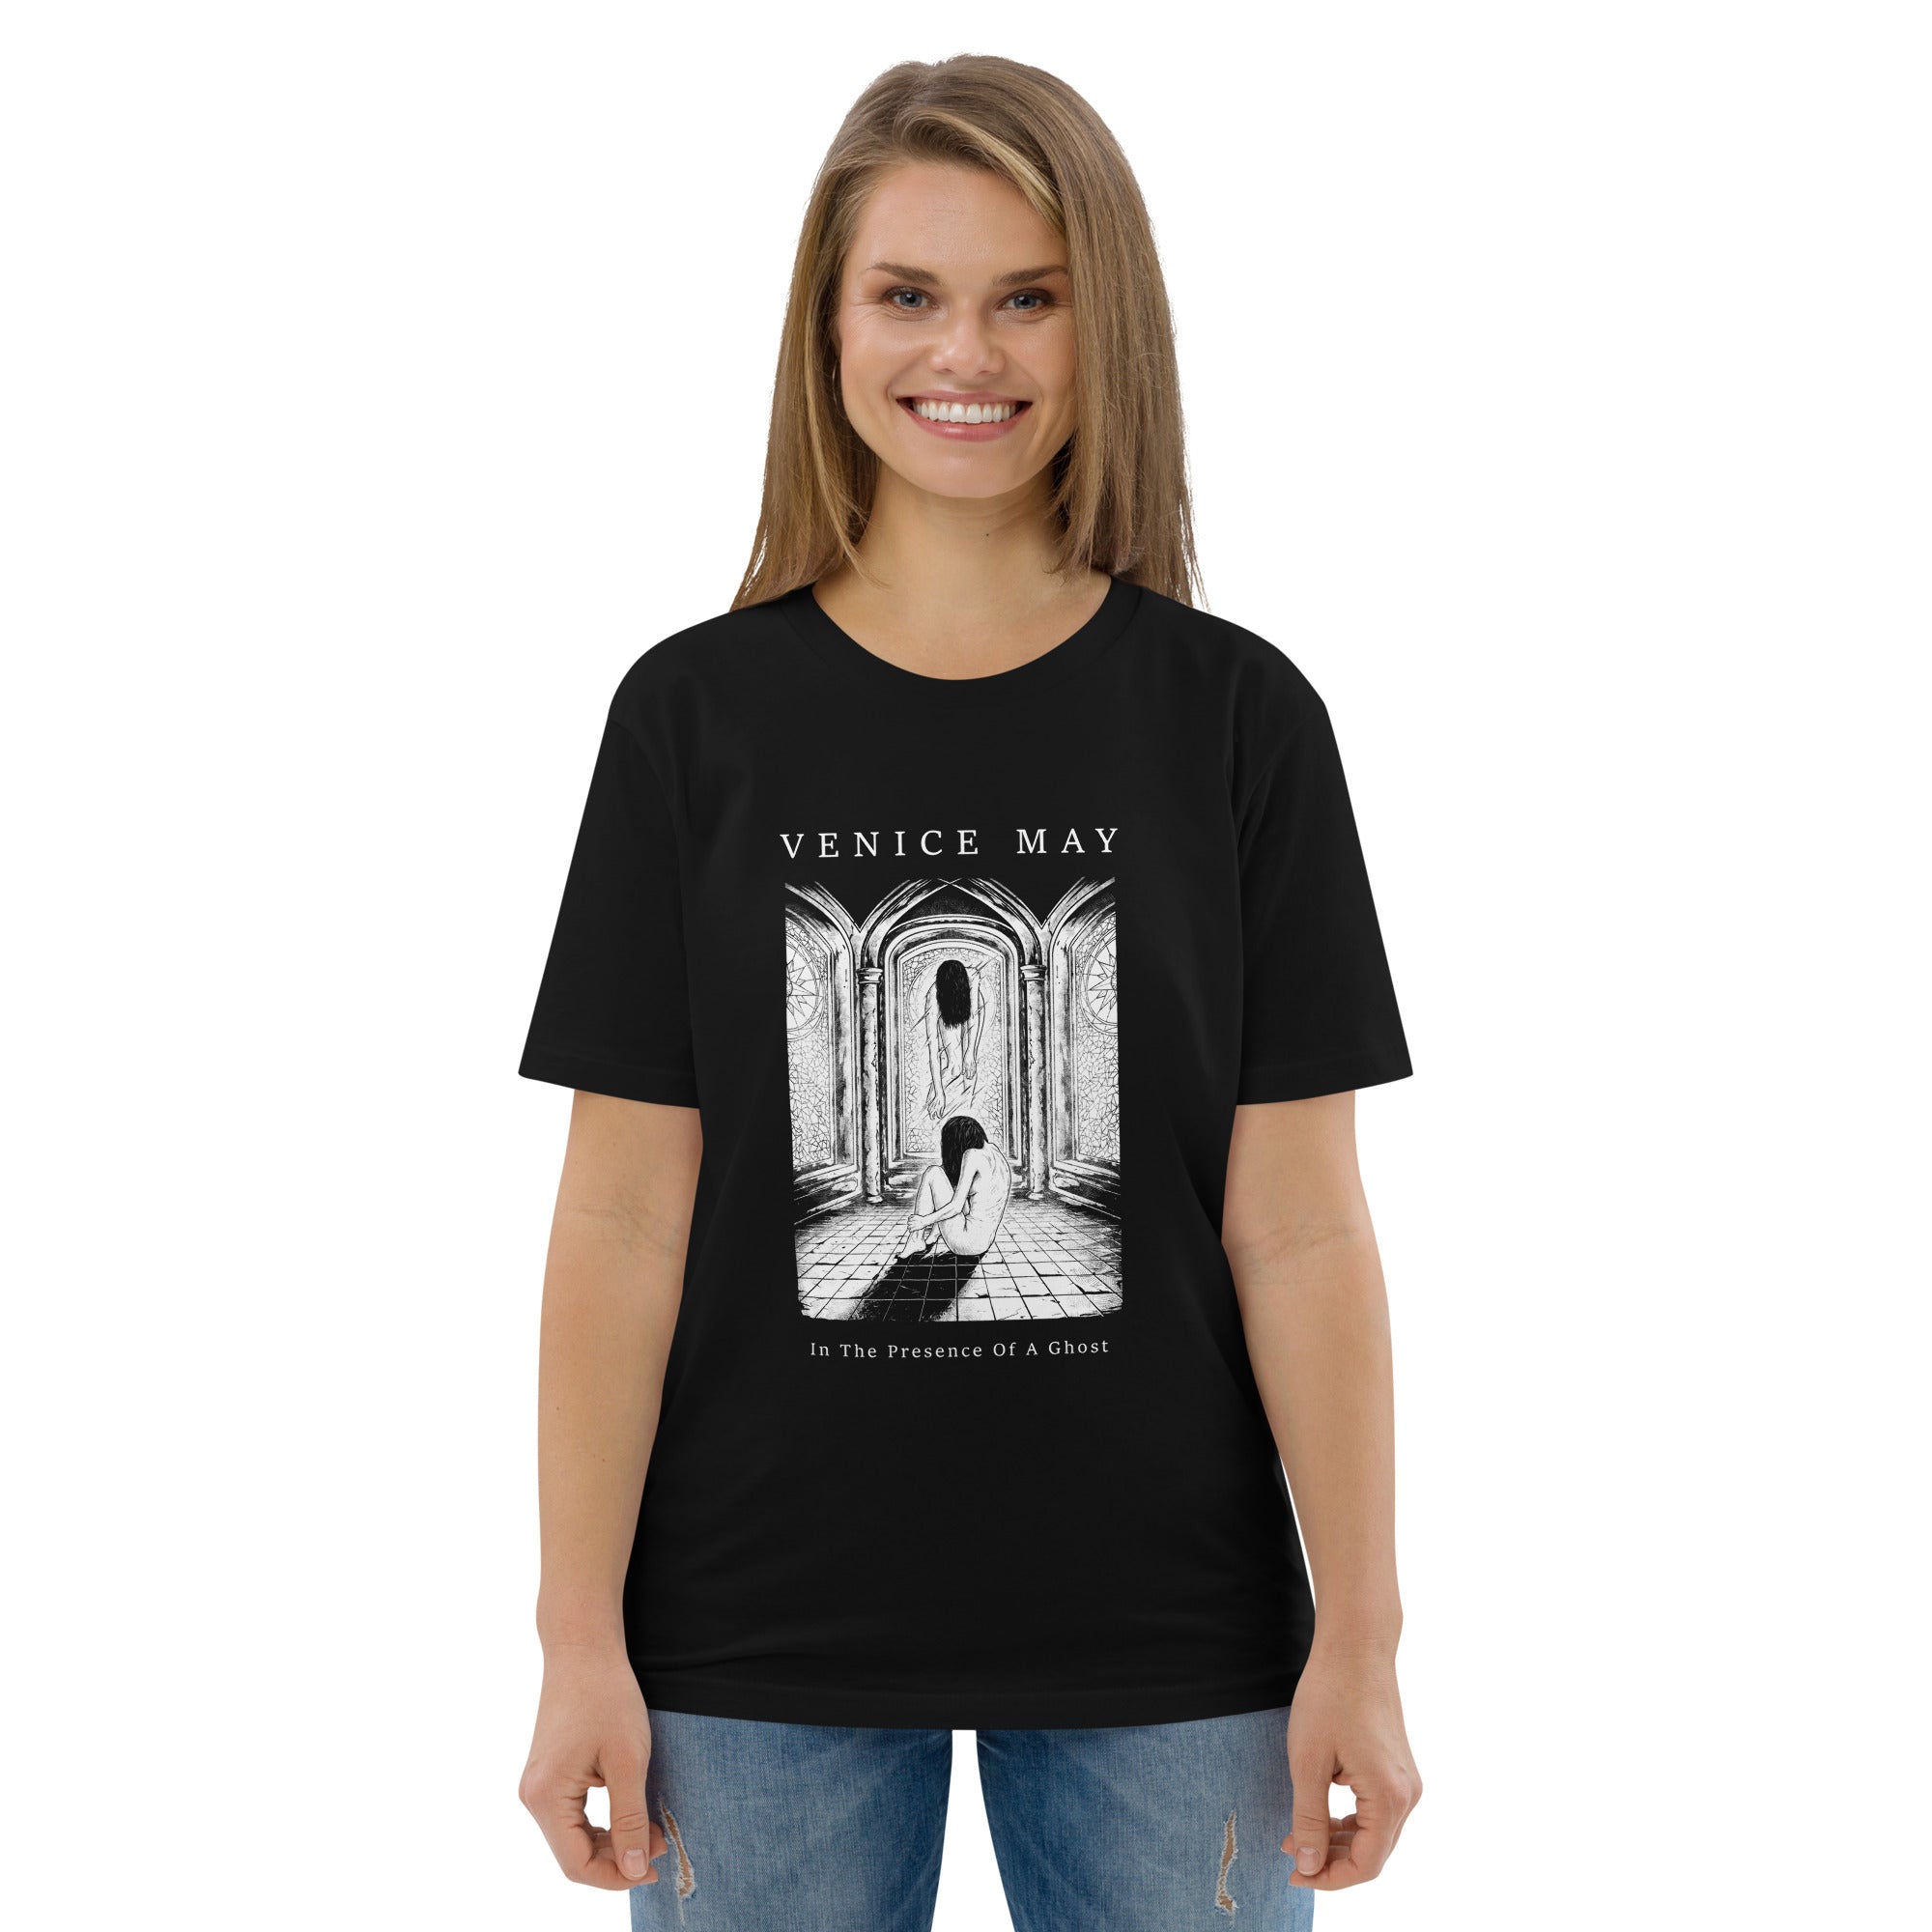 "In The Presence Of A Ghost" T-shirt